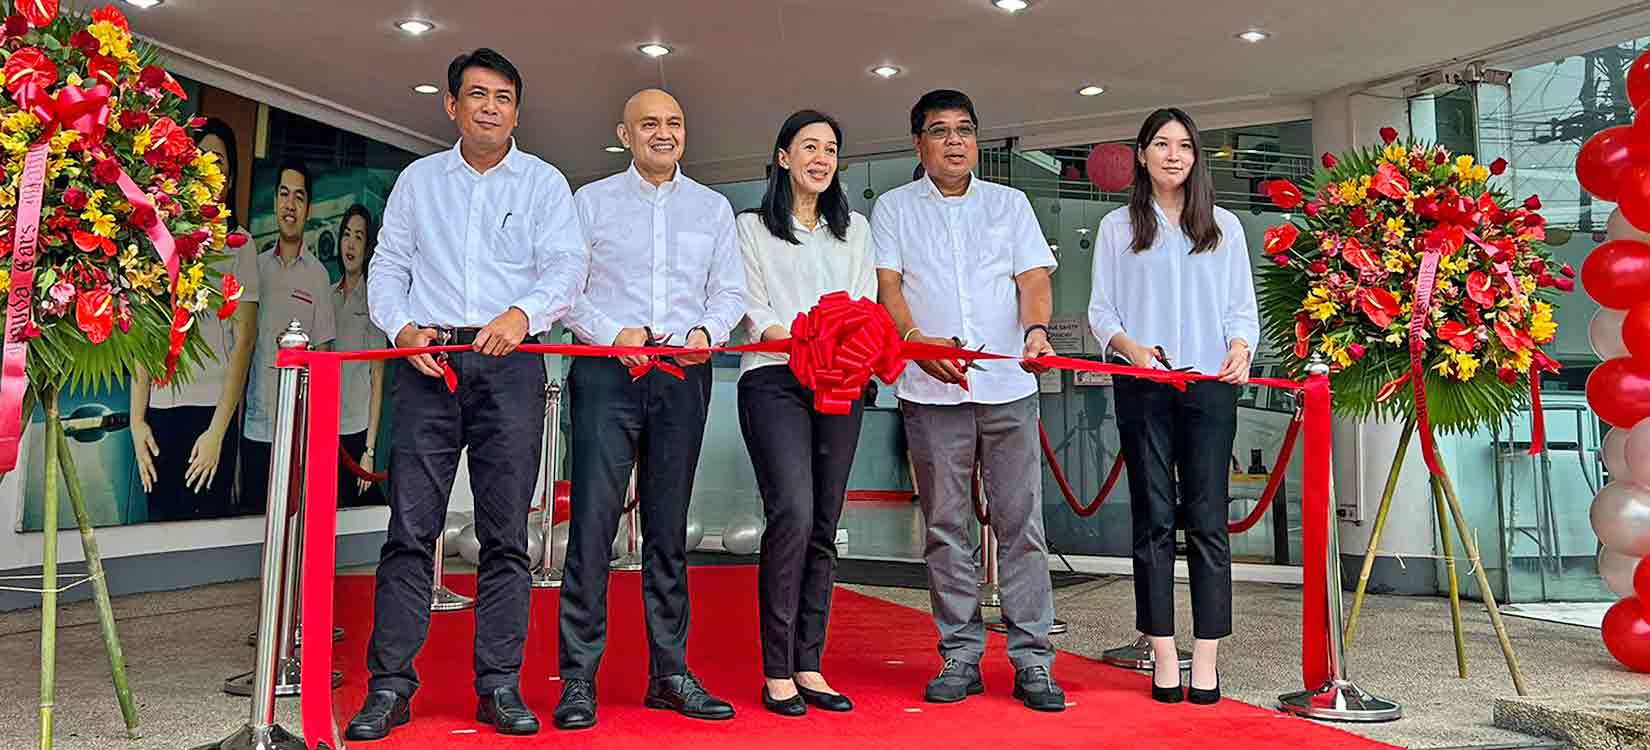 Honda dealers upgrade with new global design –  Honda Cars Manila is first to get fresh new look